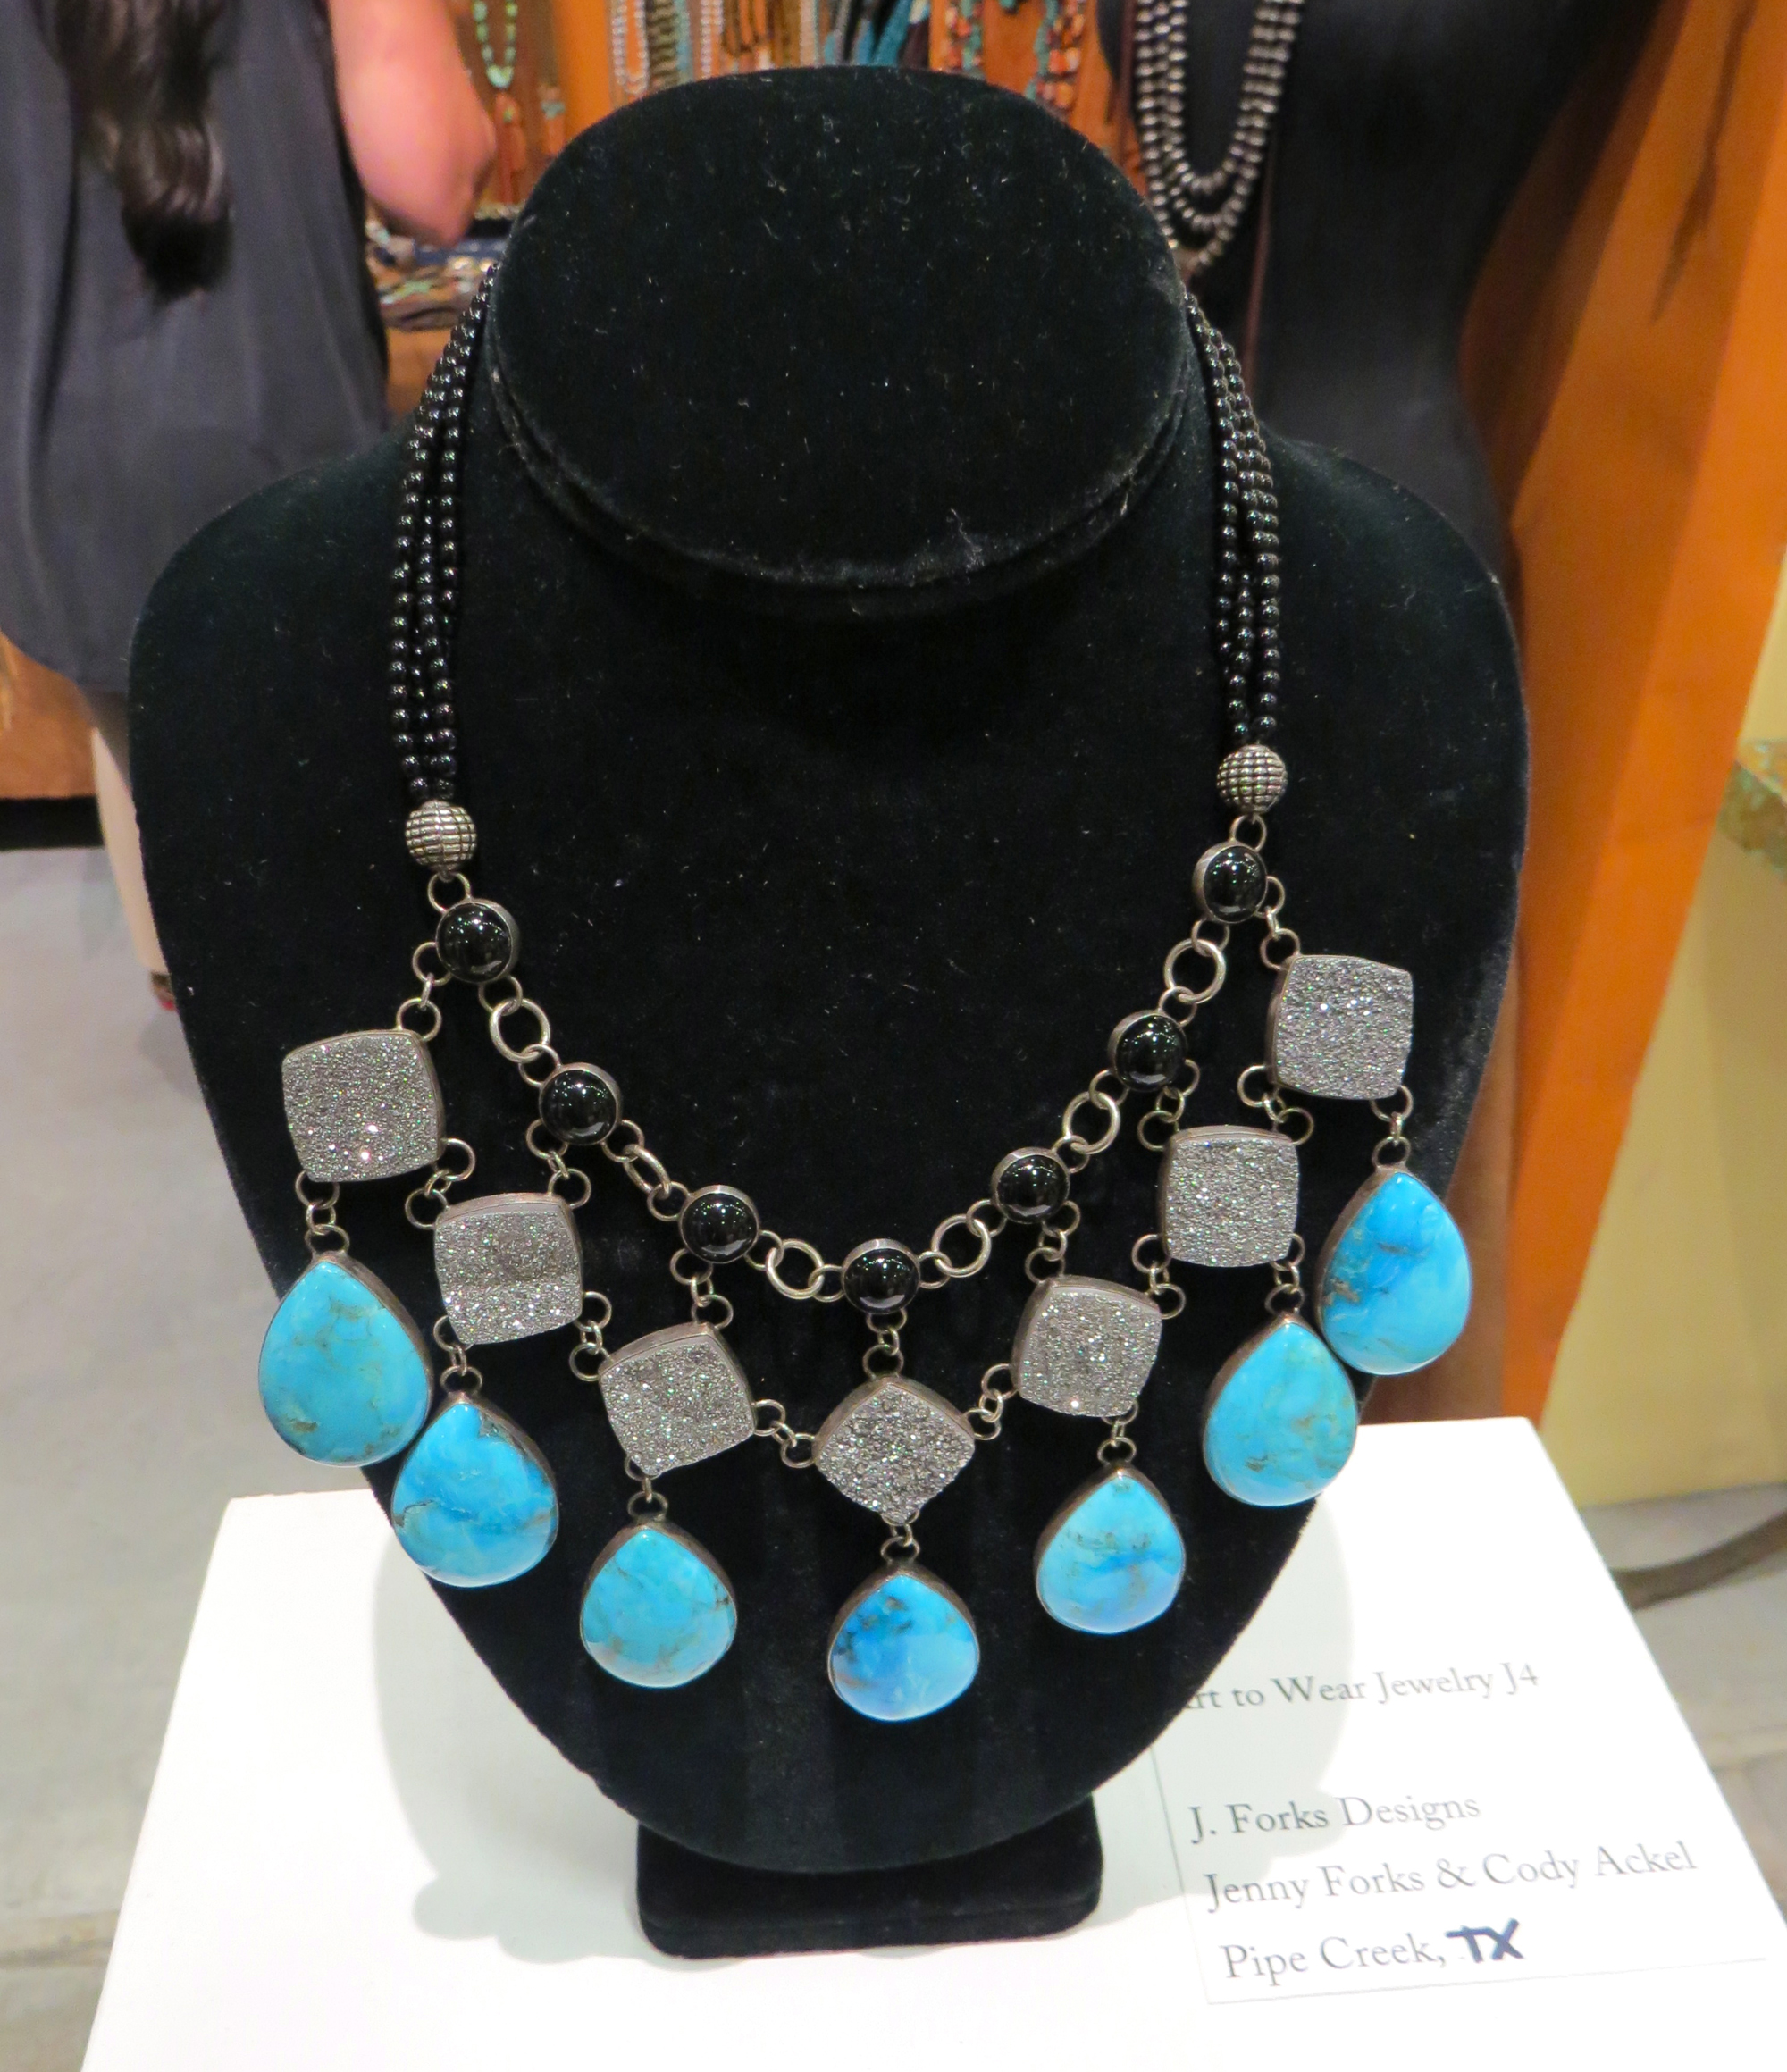 A turquoise necklace by J. Forks Design out of Texas, at the 2016 Western Design Conference Exhibit + Sale, is an example of the amazing handcrafted jewelry on display.